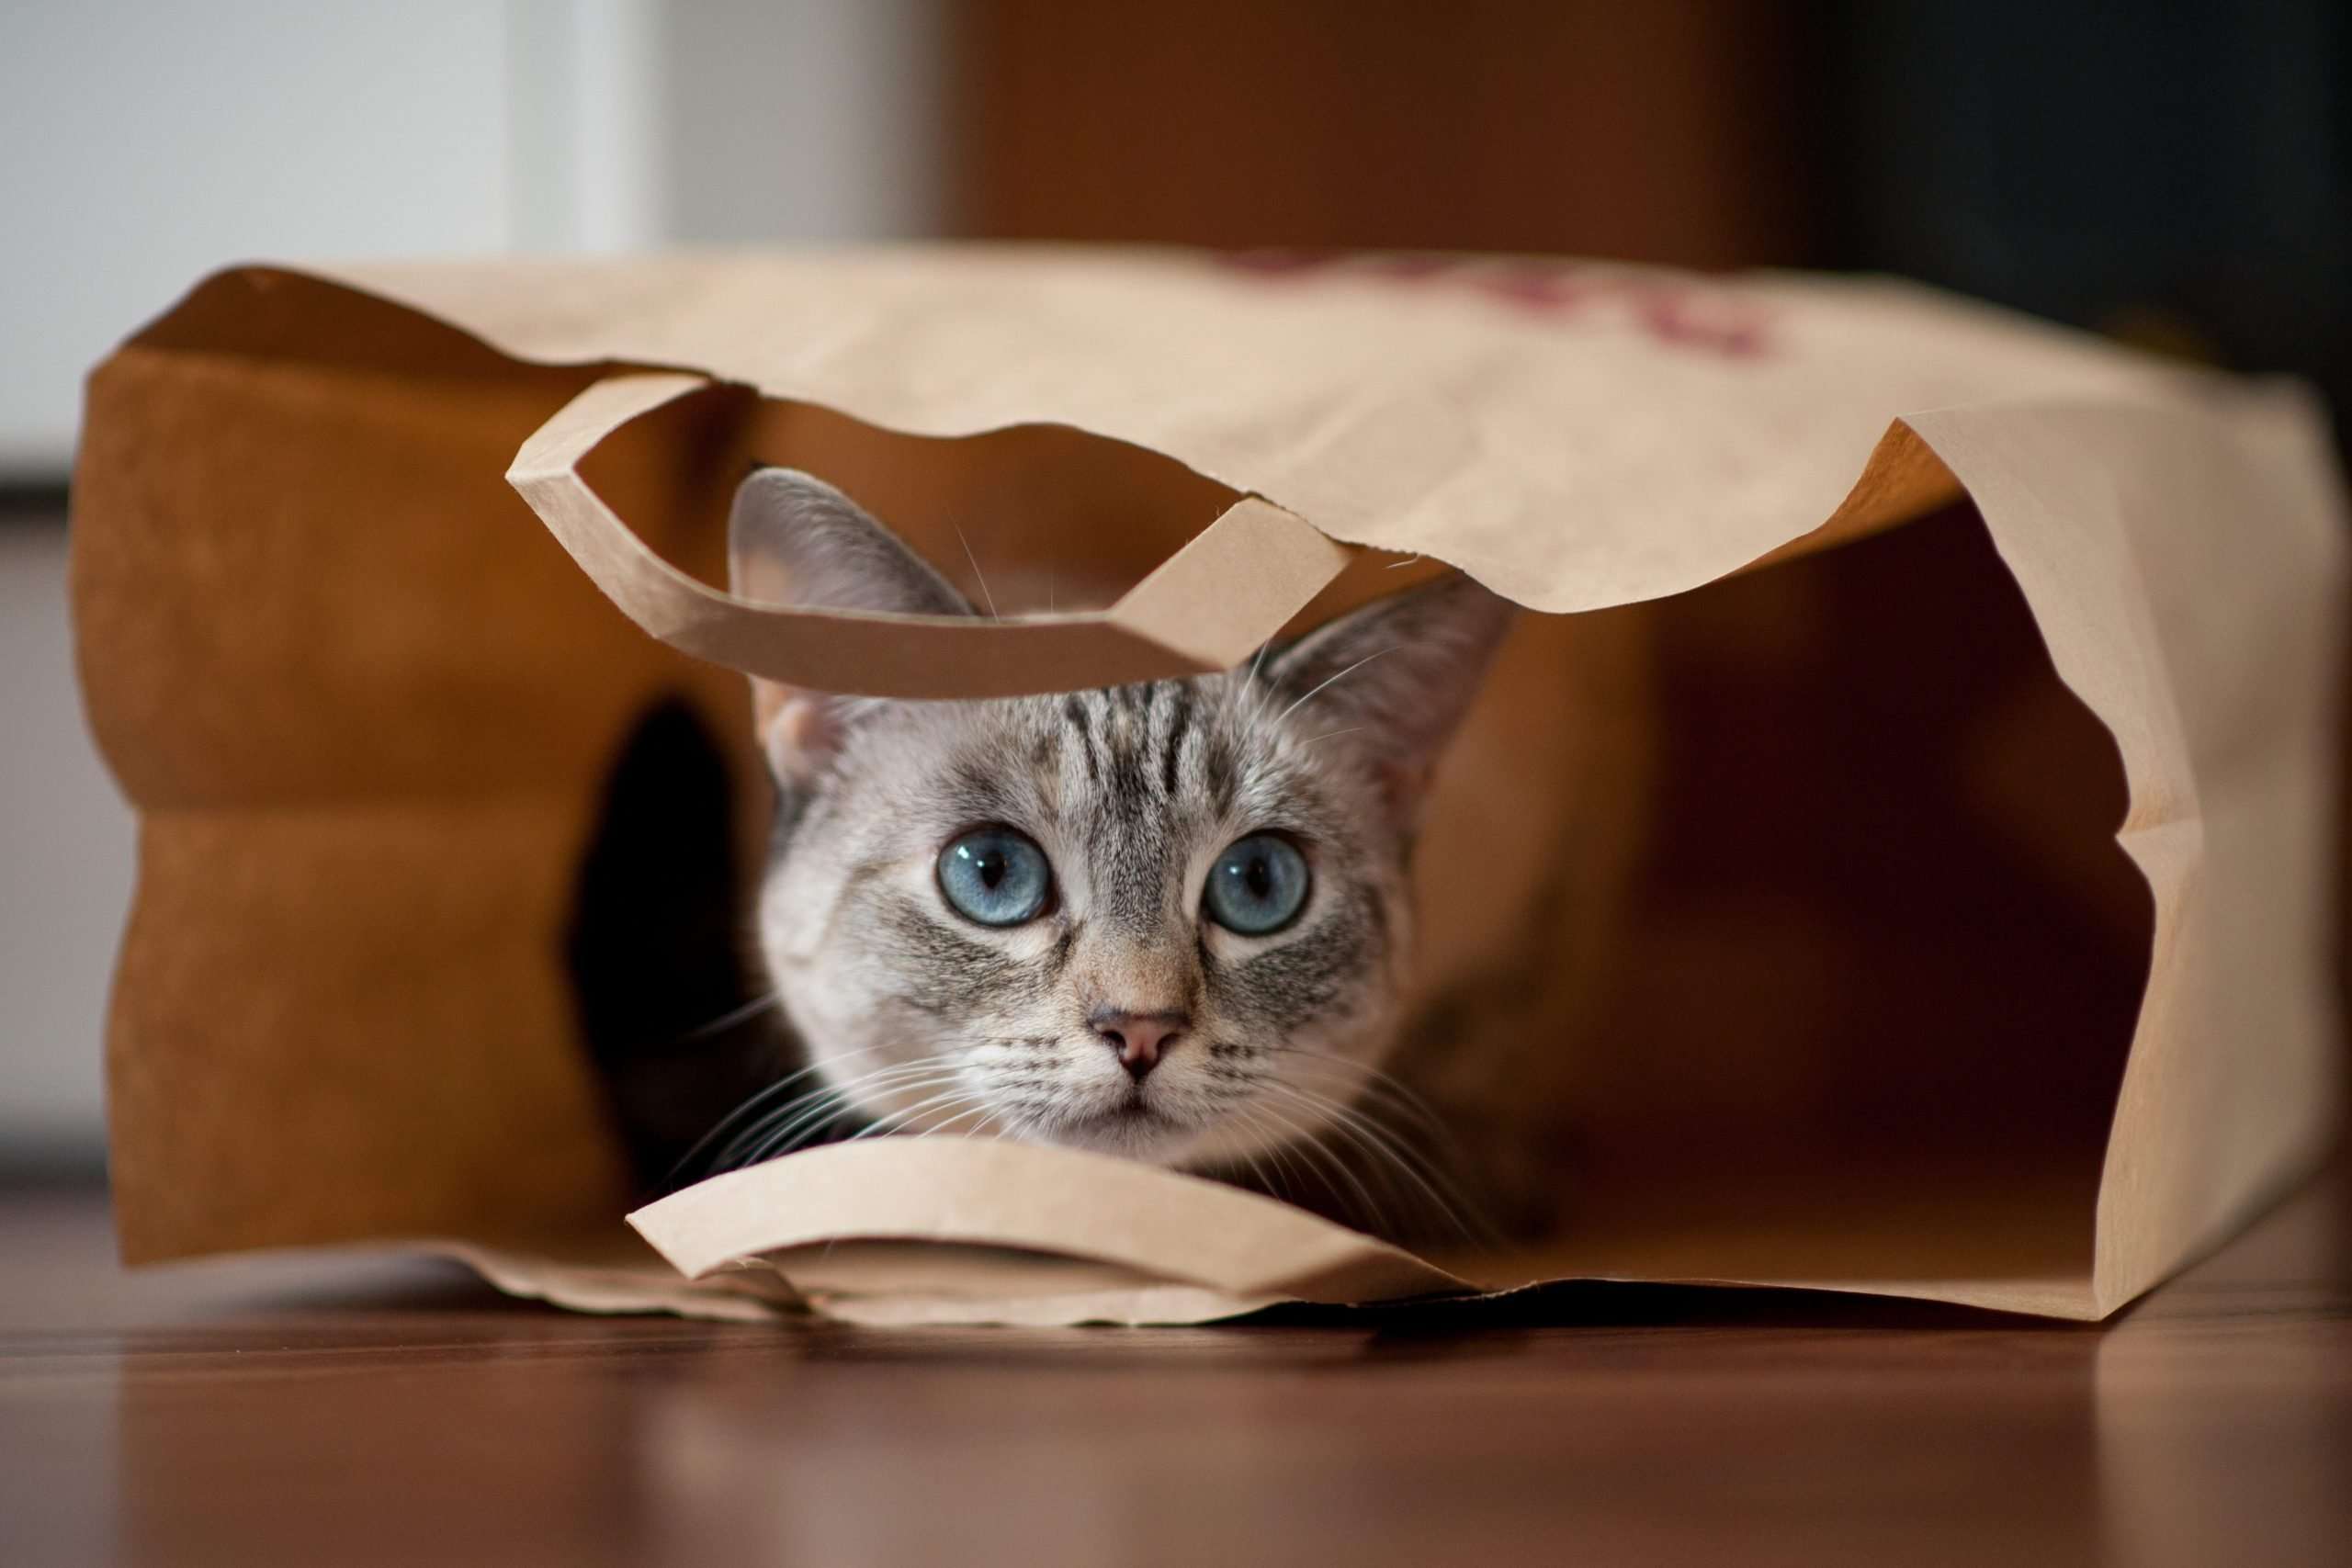 Why Do We Say "Let the Cat Out of the Bag"?